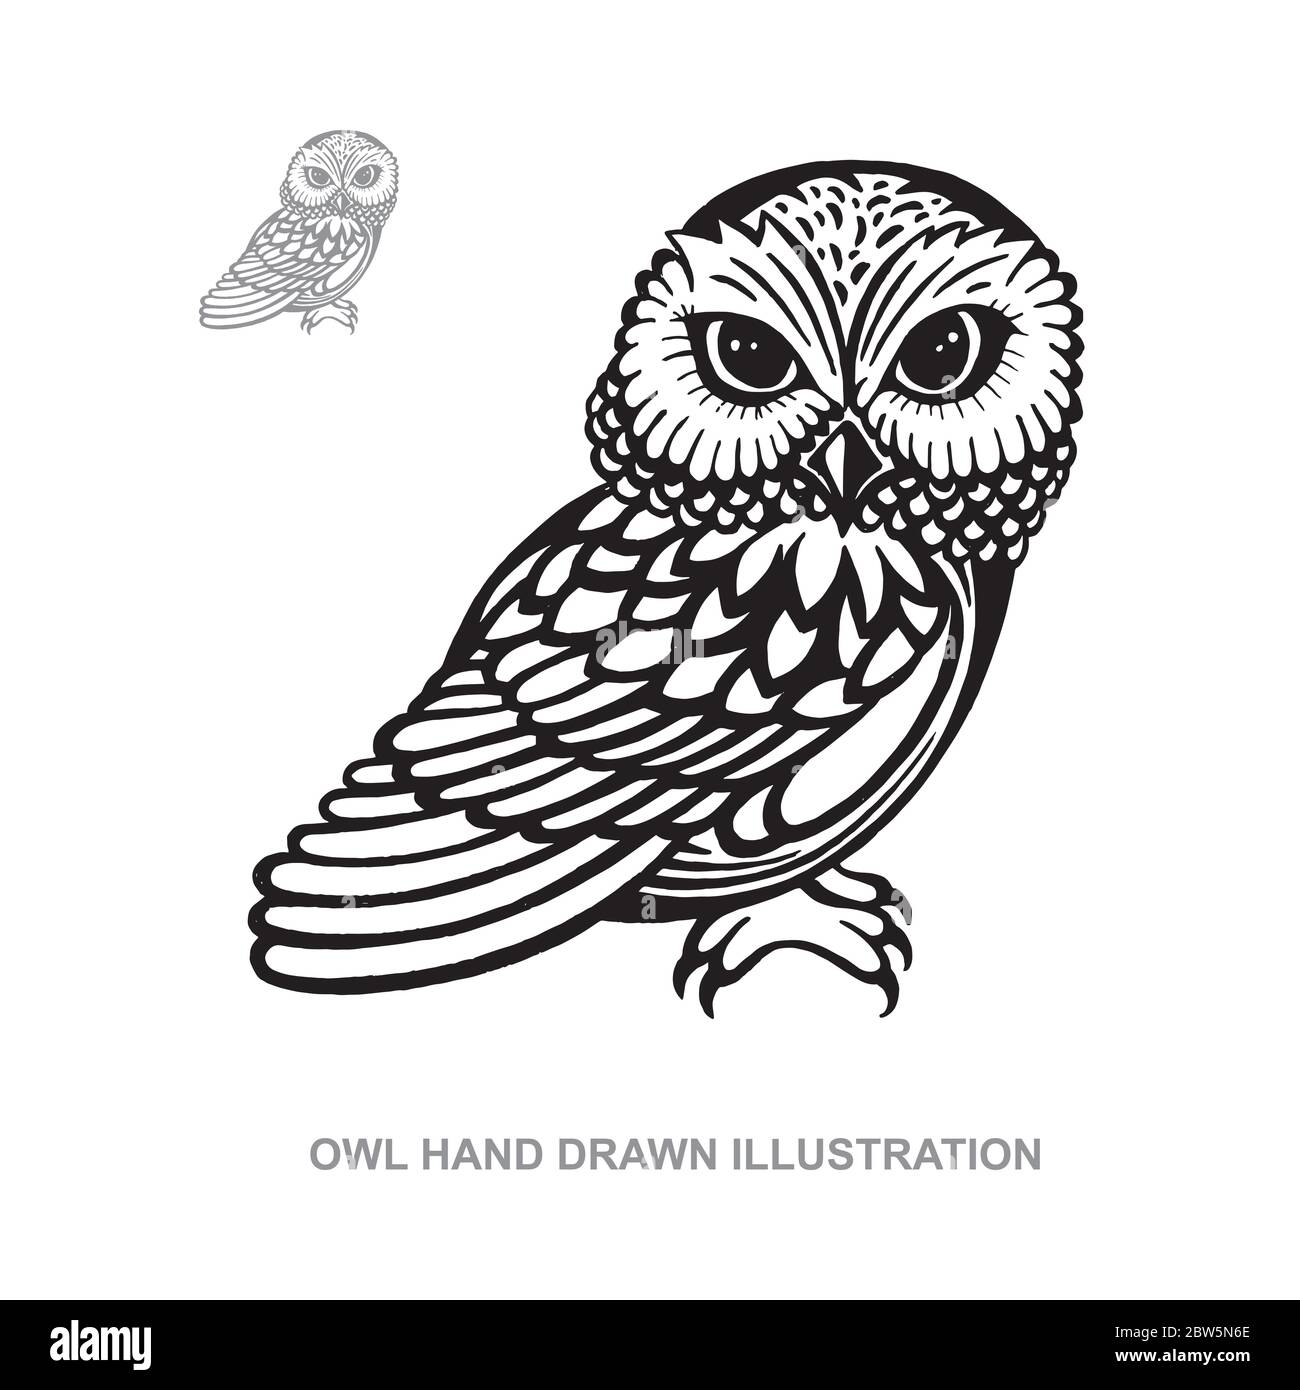 How to Draw a Owl for Children - A Step-by-Step Guide With Pictures